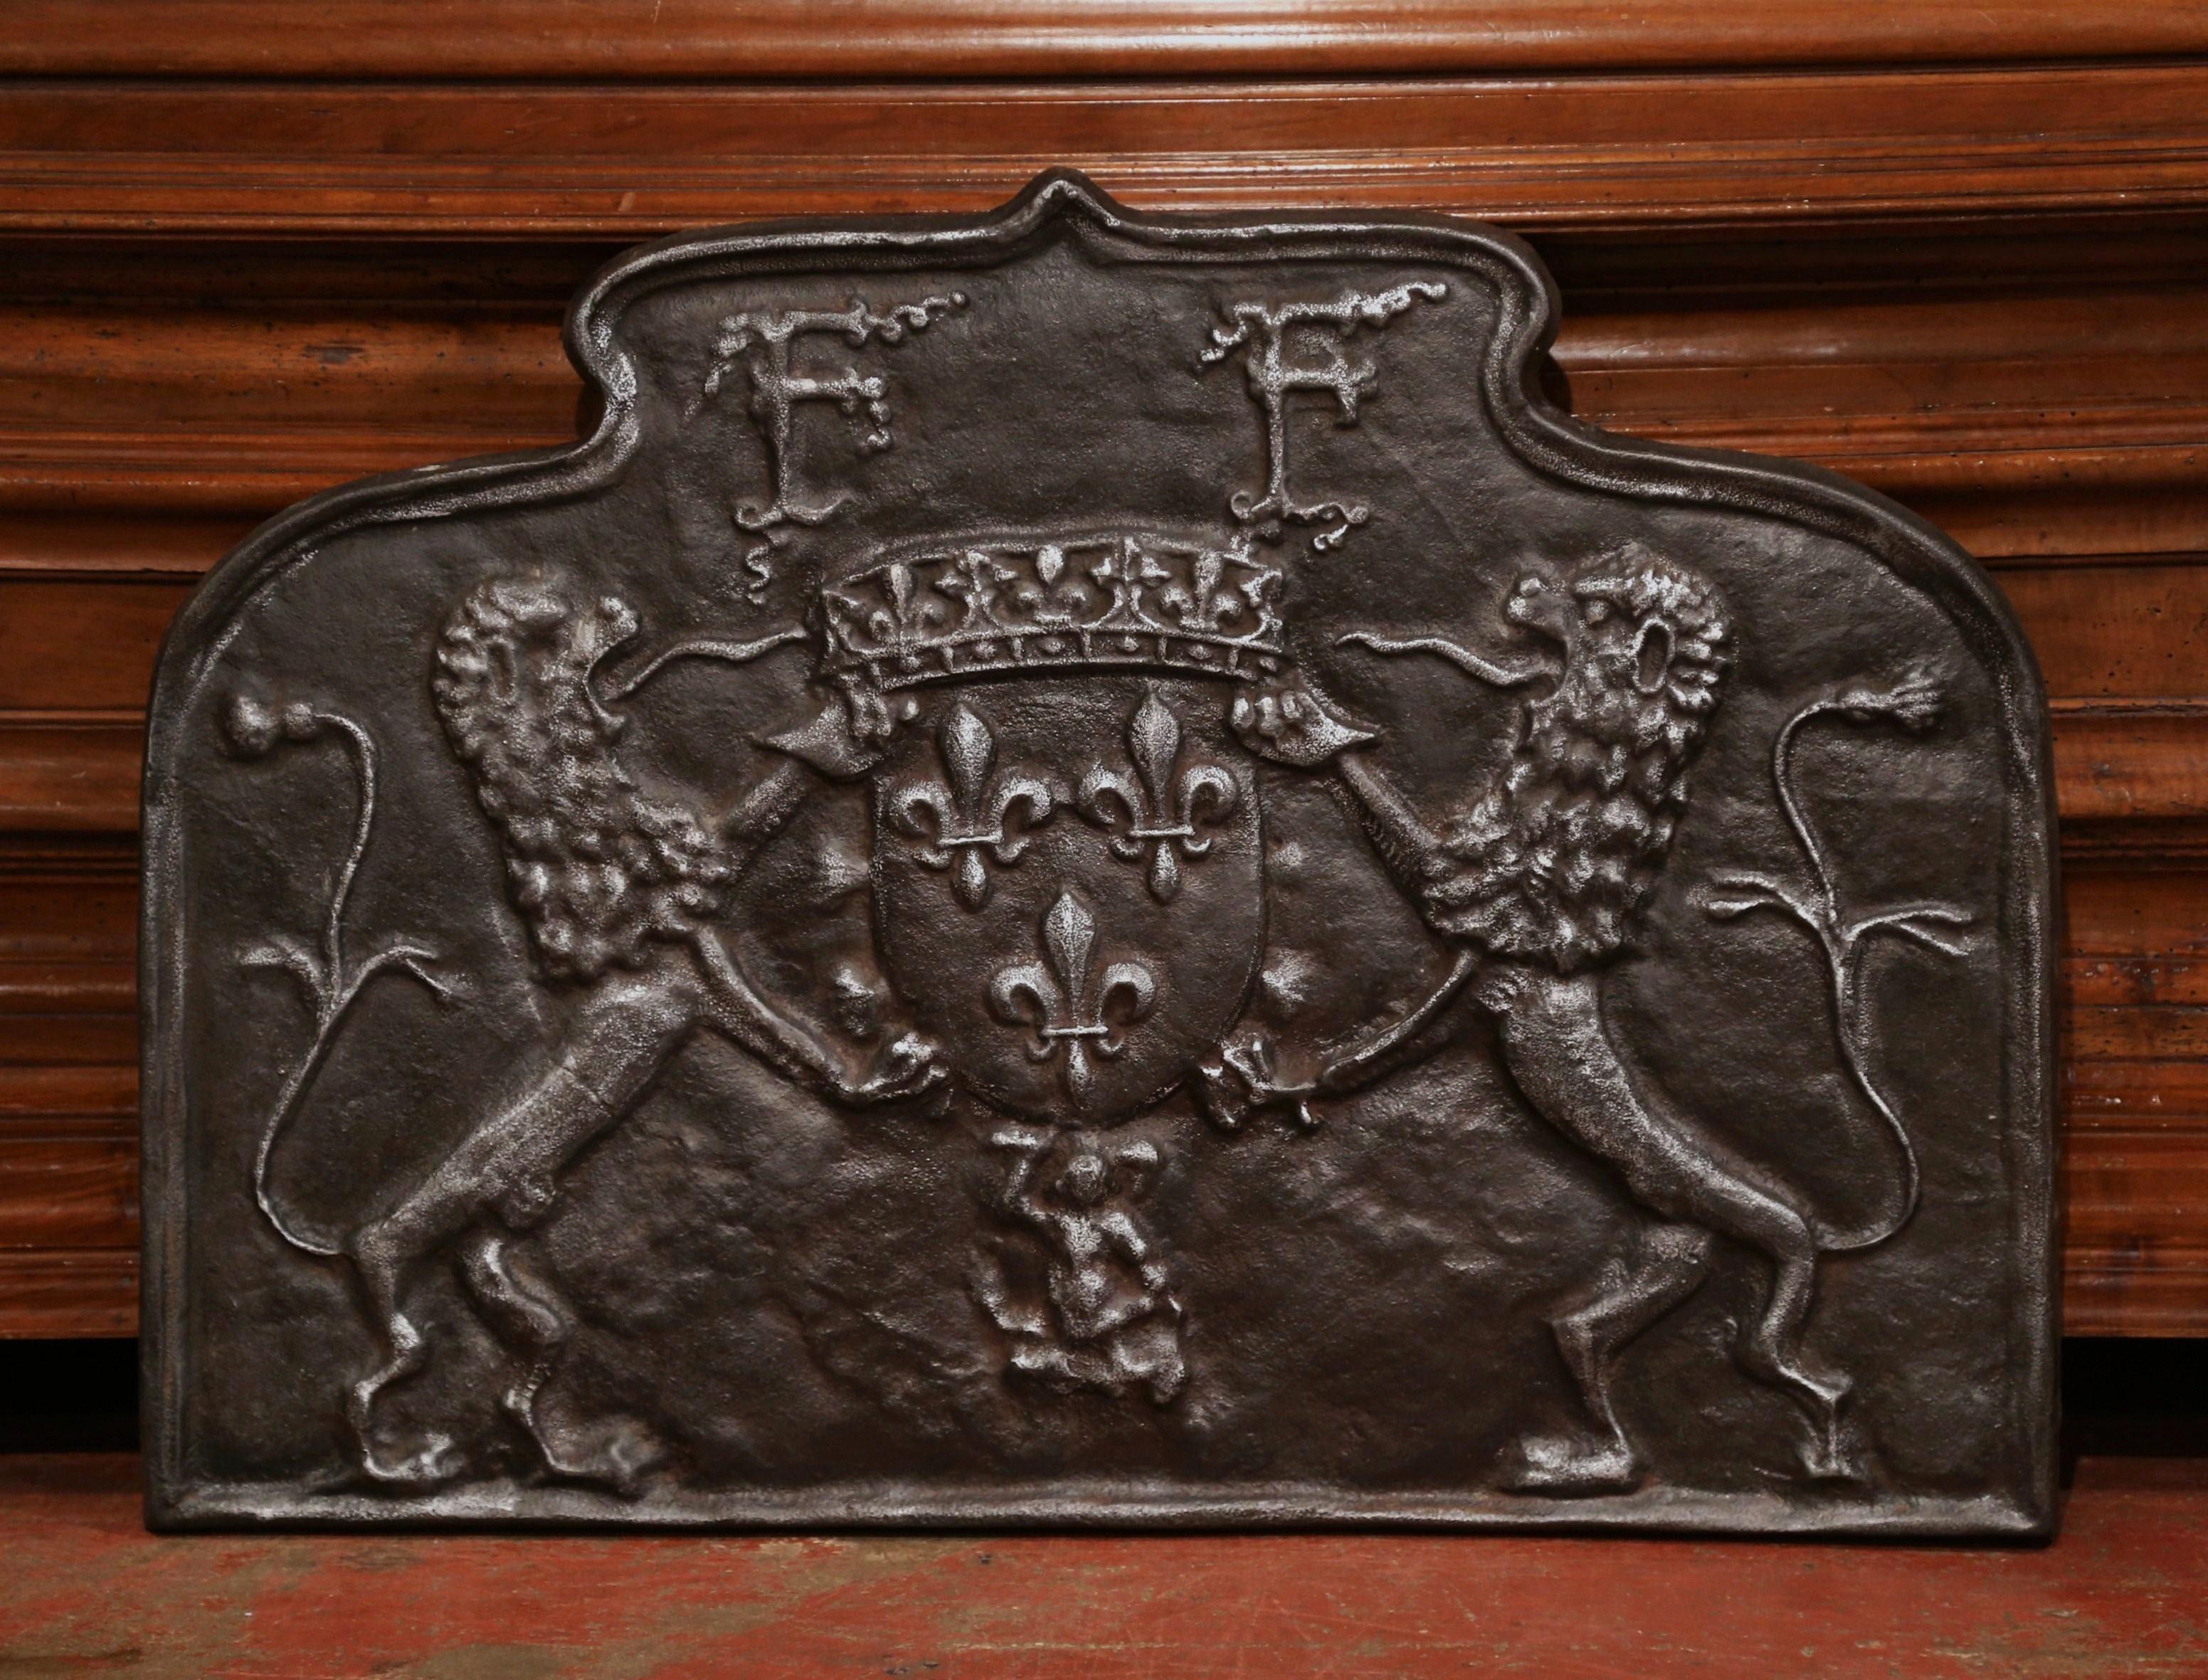 Hand-Crafted 18th Century French Iron Fireback with Coat of Arms and Fleurs de Lys